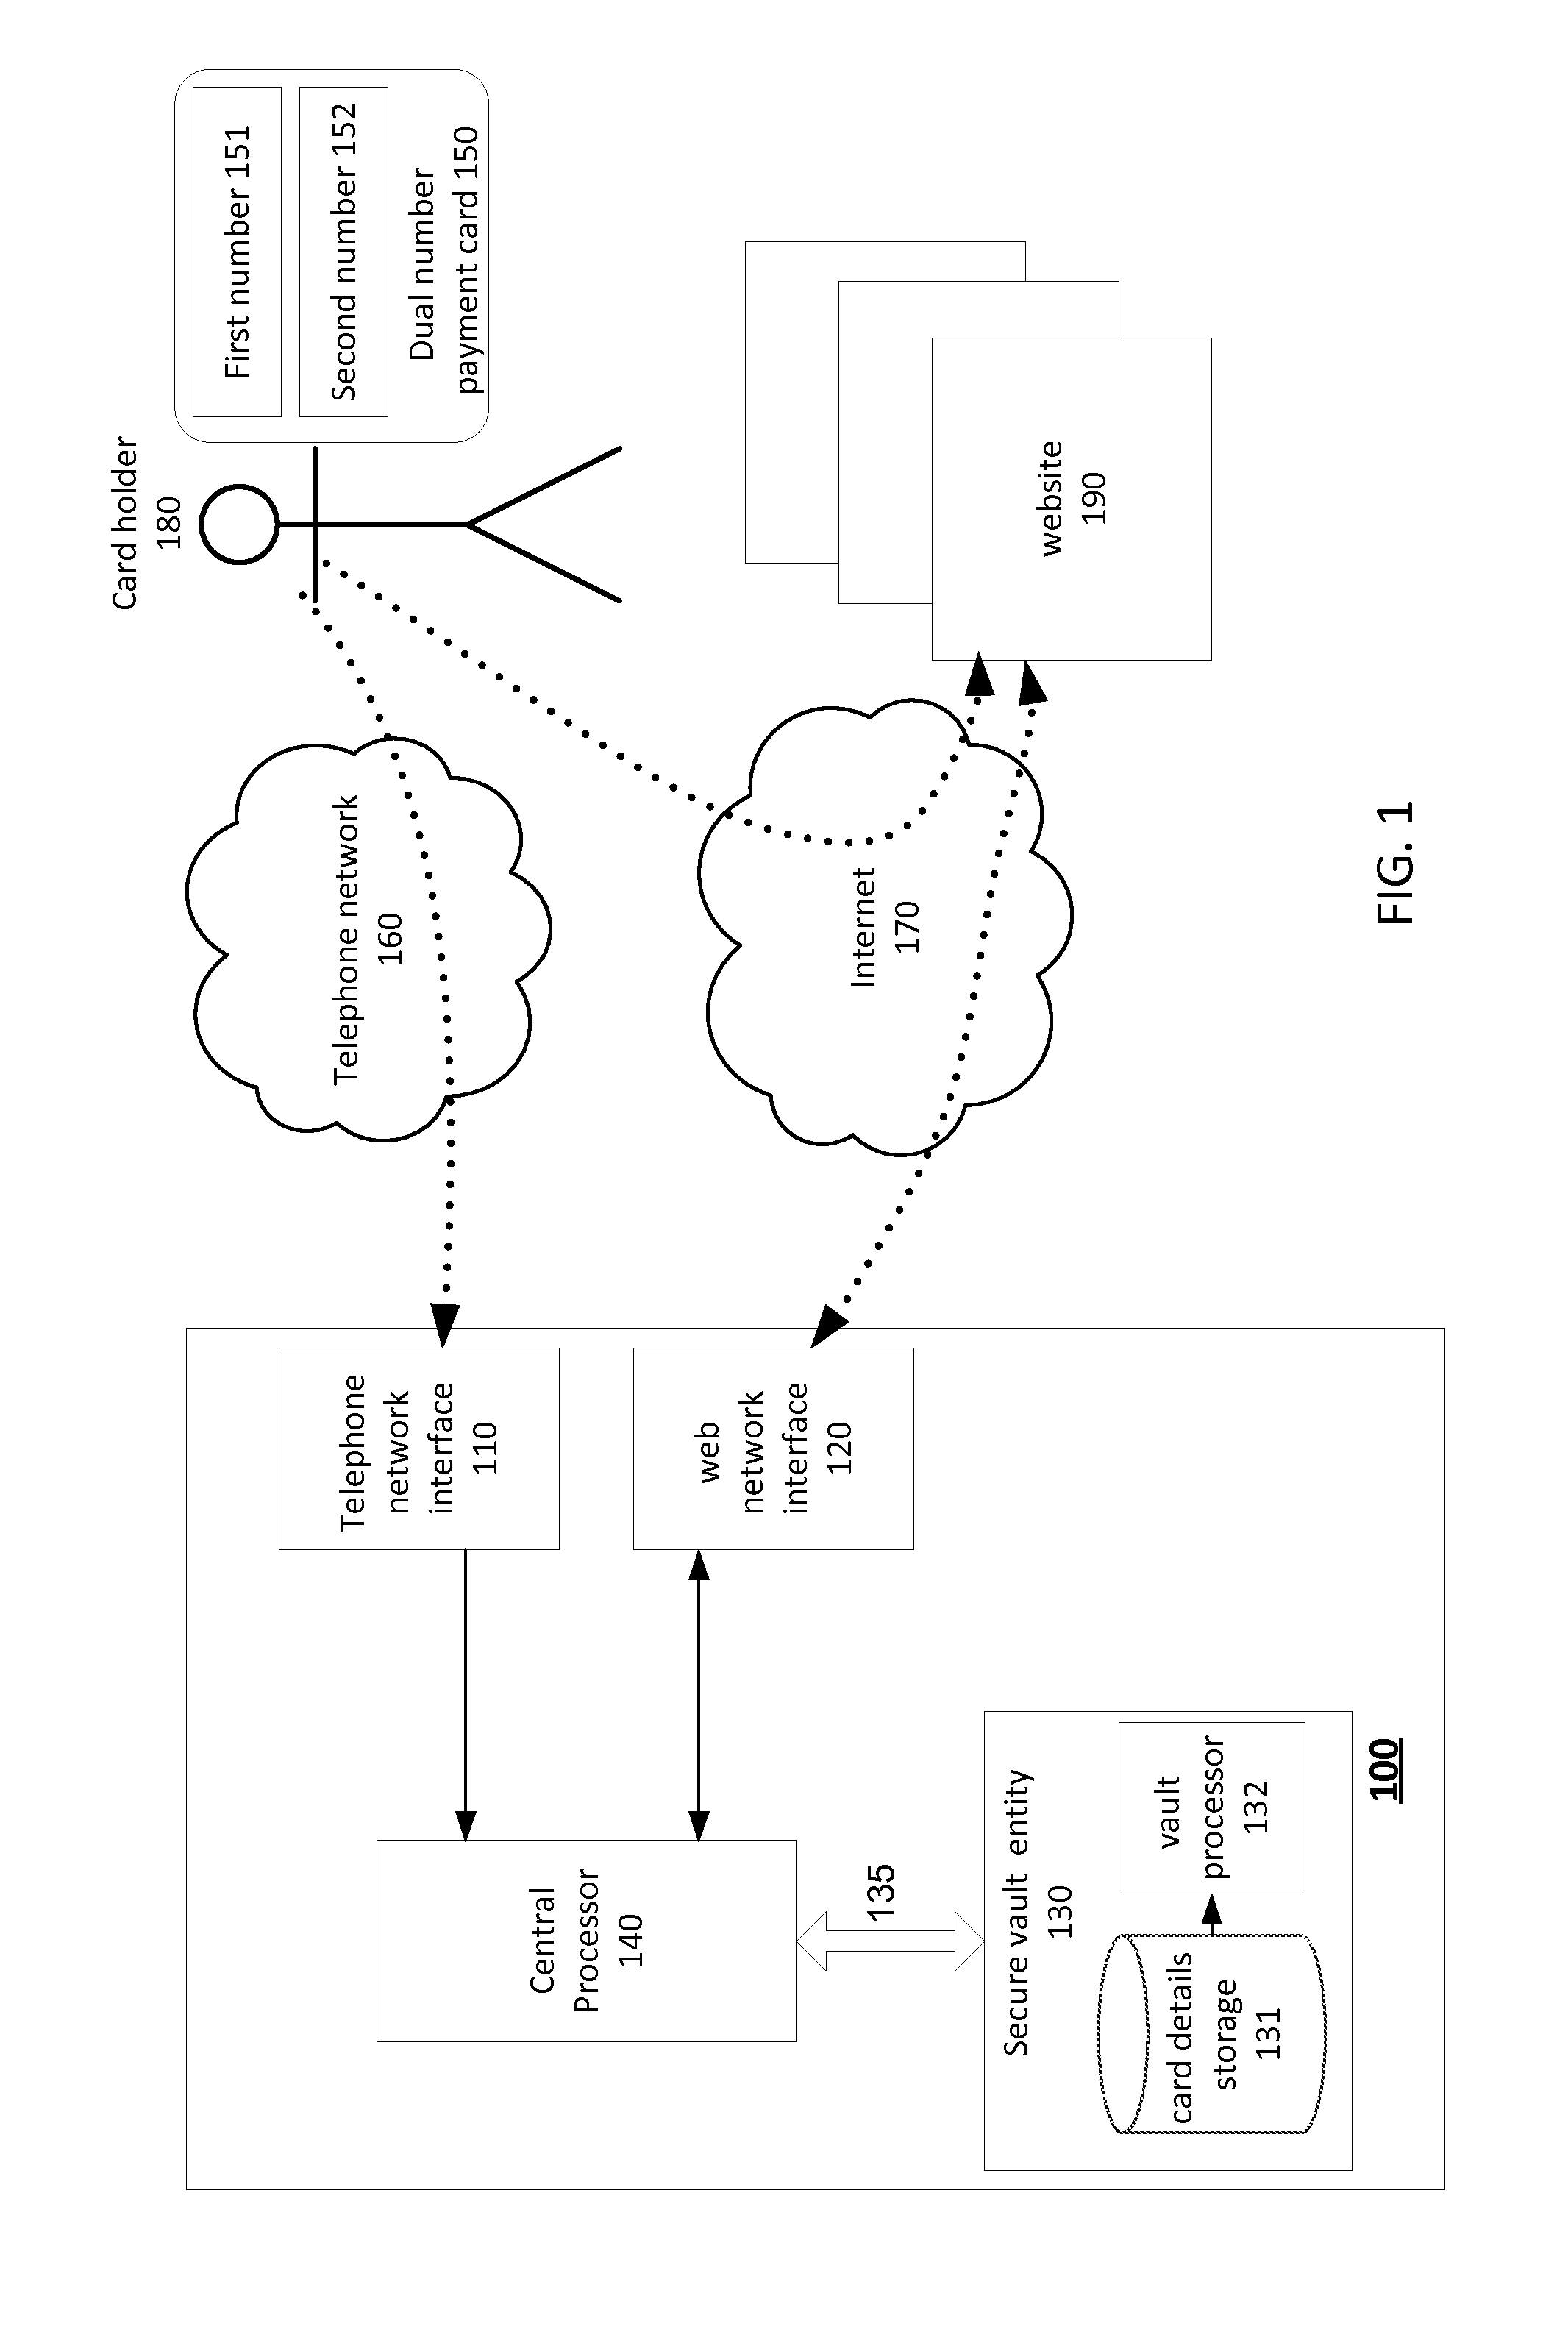 System and method for securing and authenticating purchase transactions